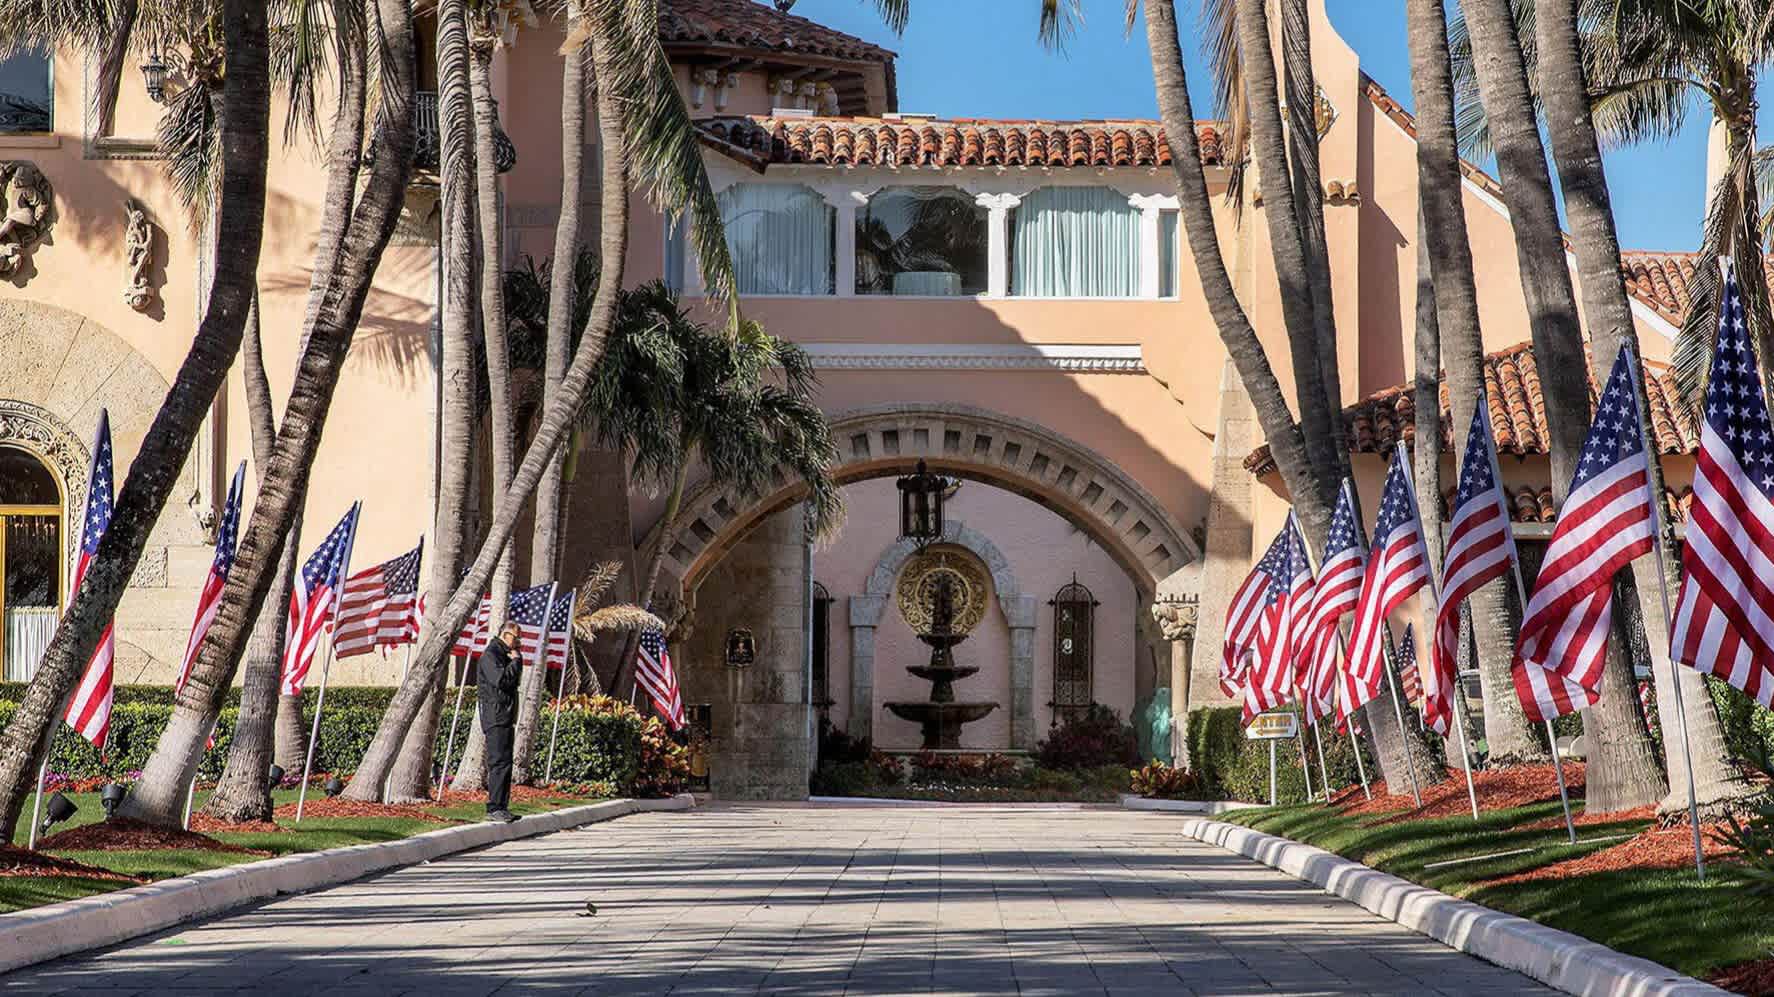 In the court of Mar-a-Lago, ‘King’ Trump still reigns supreme